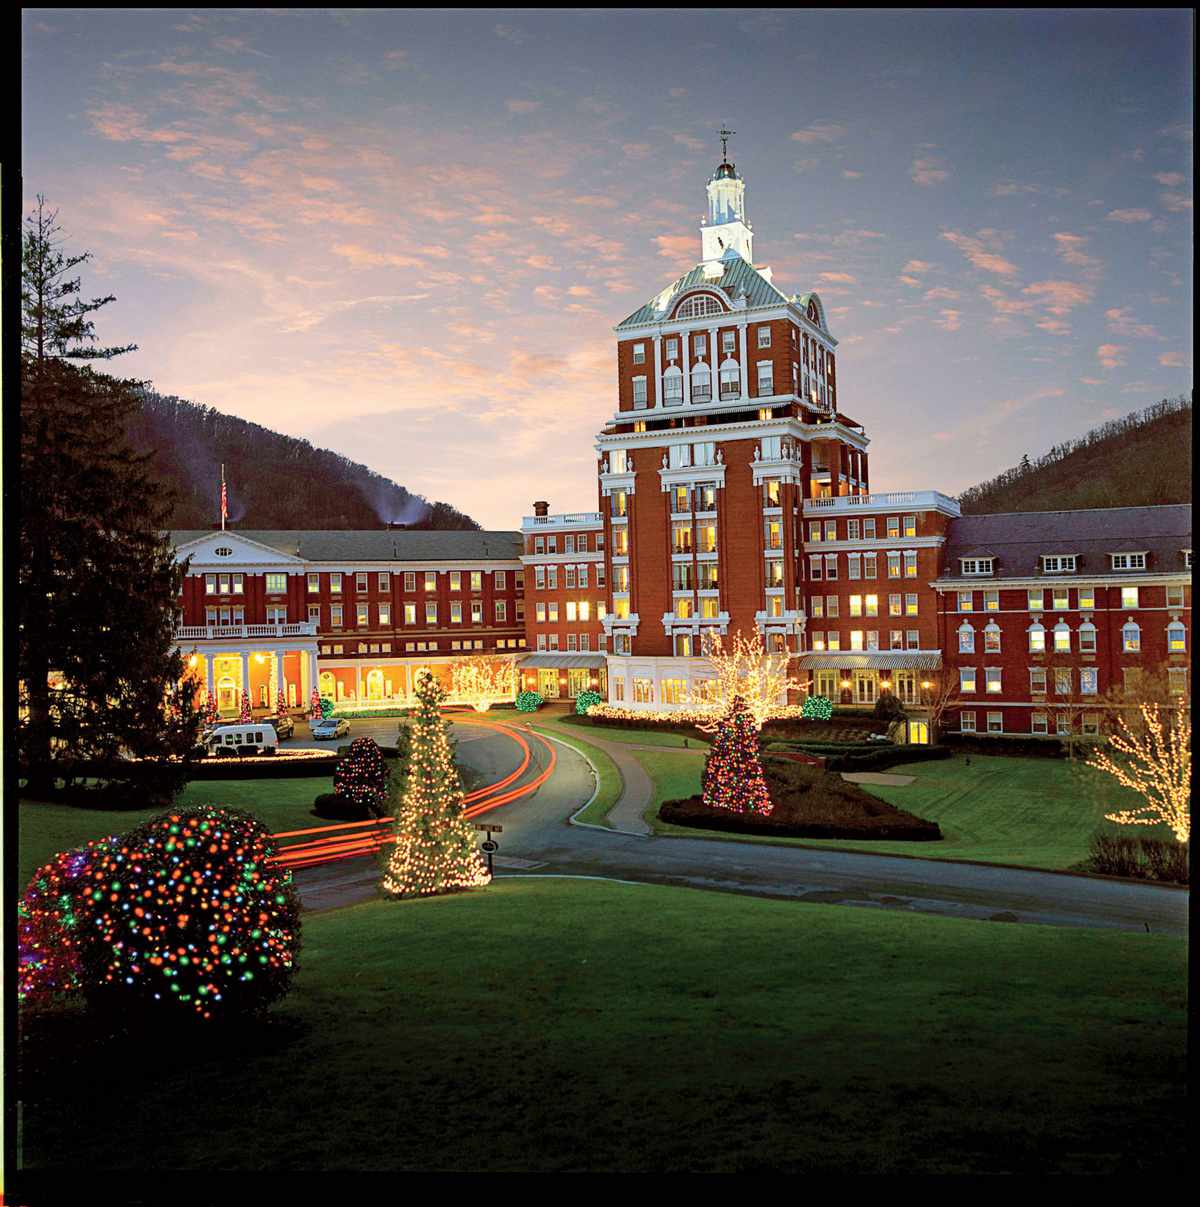 The Mountains: The Omni Homestead Resort